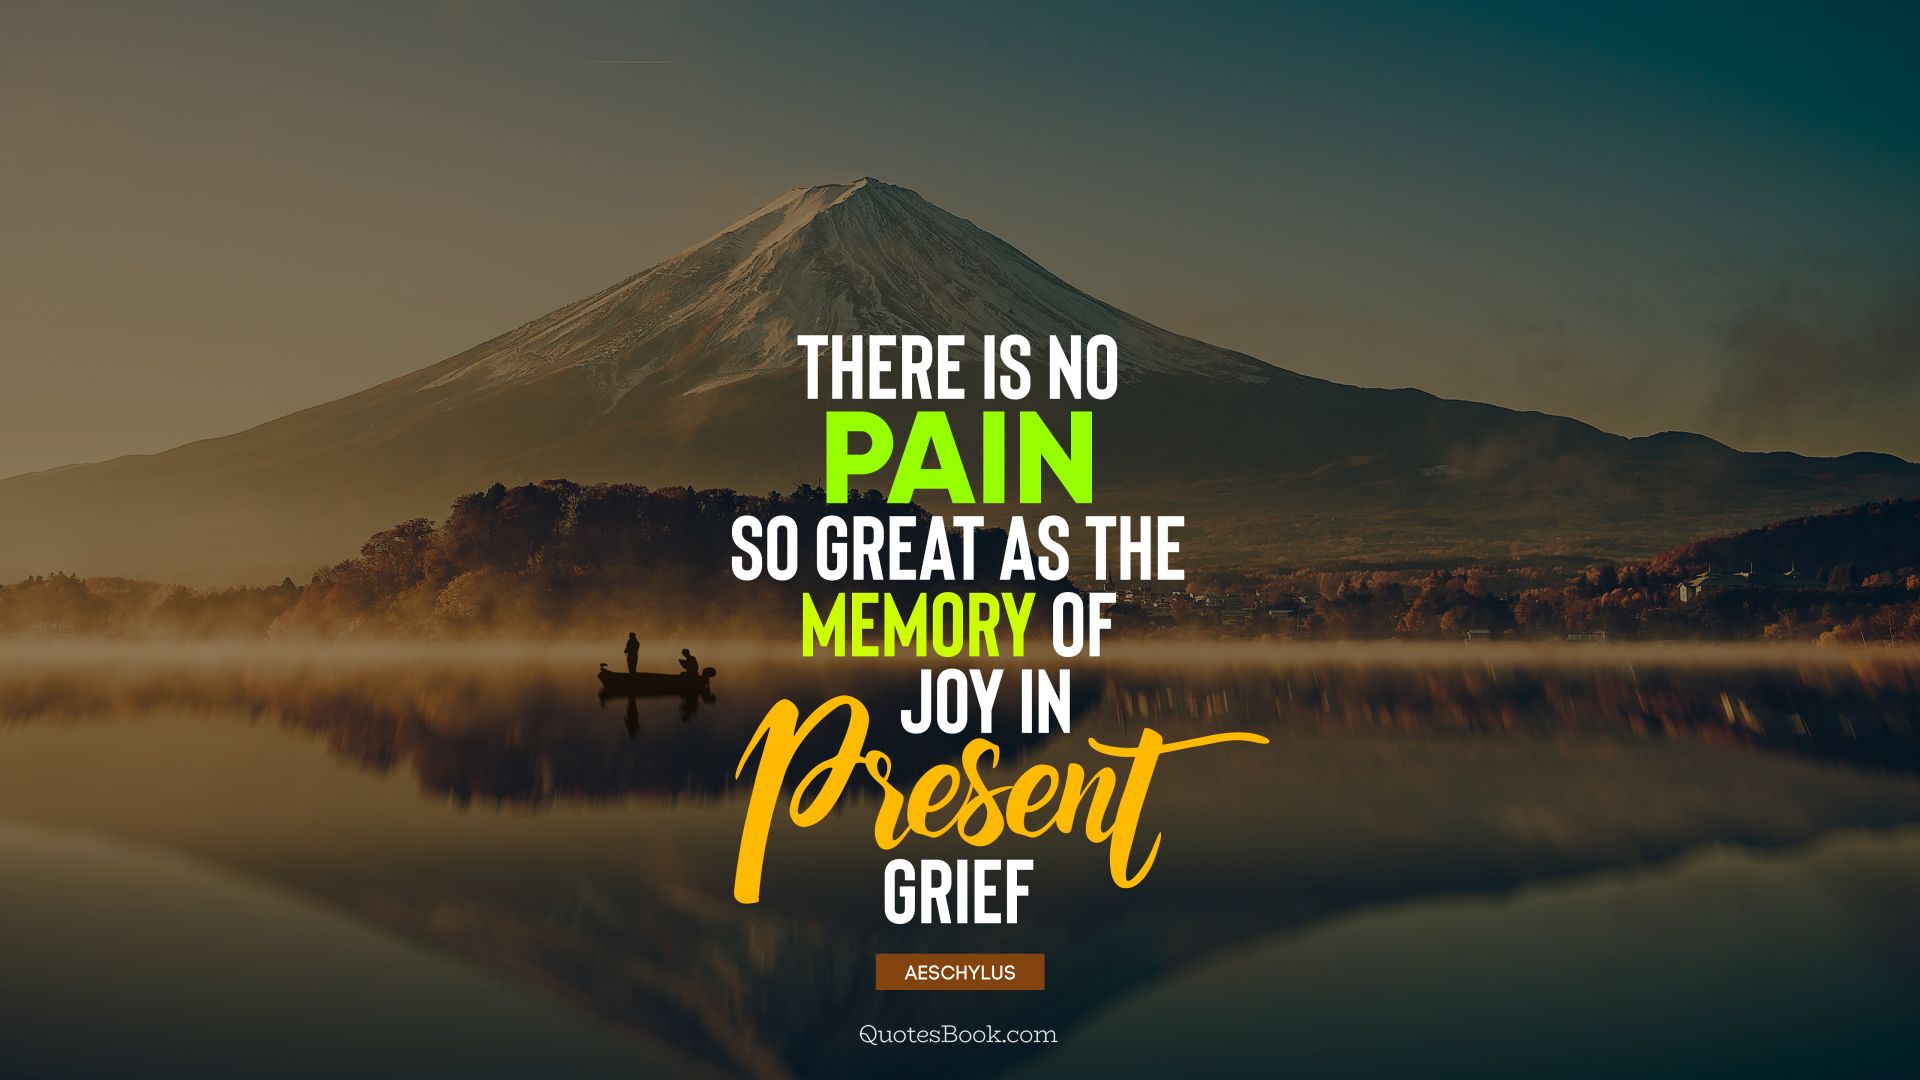 There is no pain so great as the memory of joy in present grief. - Quote by Aeschylus